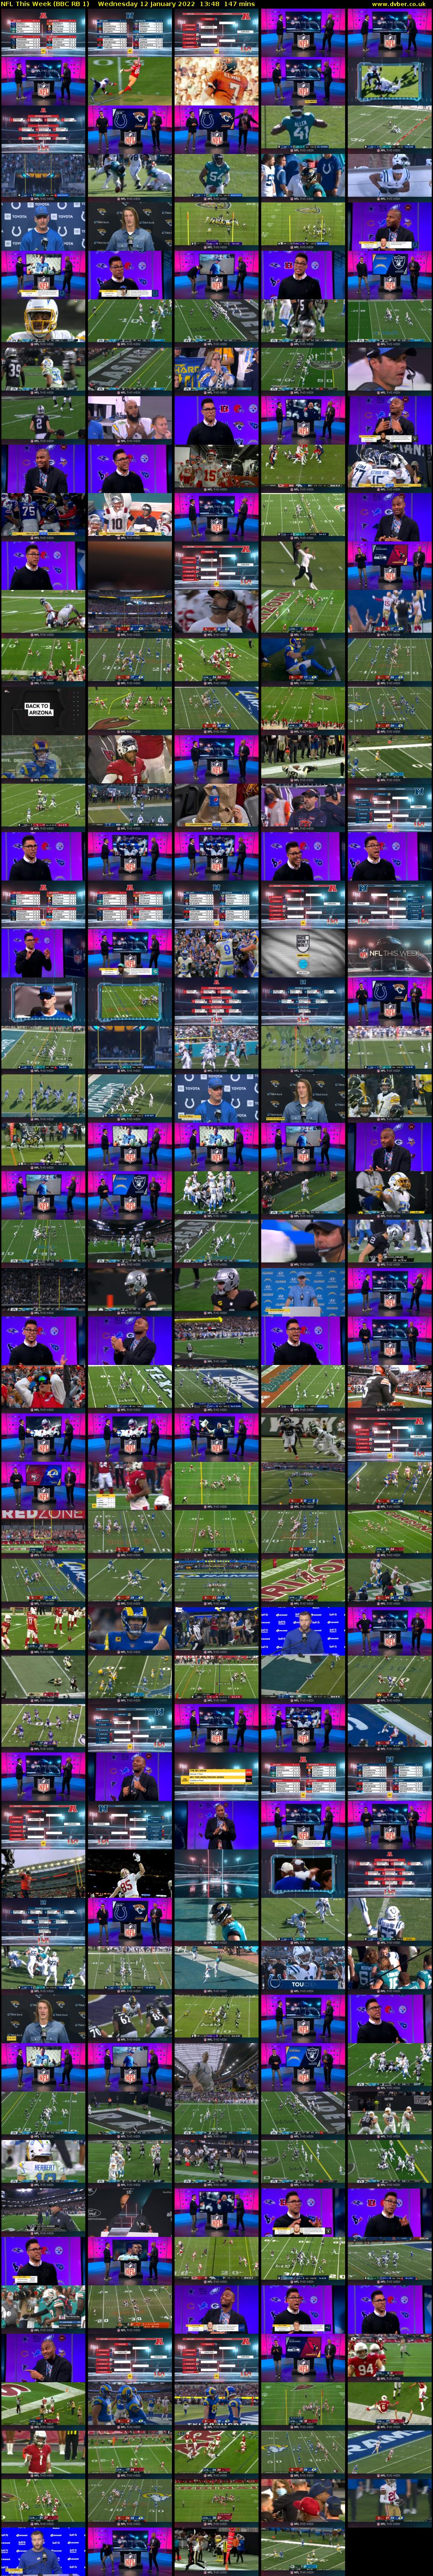 NFL This Week (BBC RB 1) Wednesday 12 January 2022 13:48 - 16:15